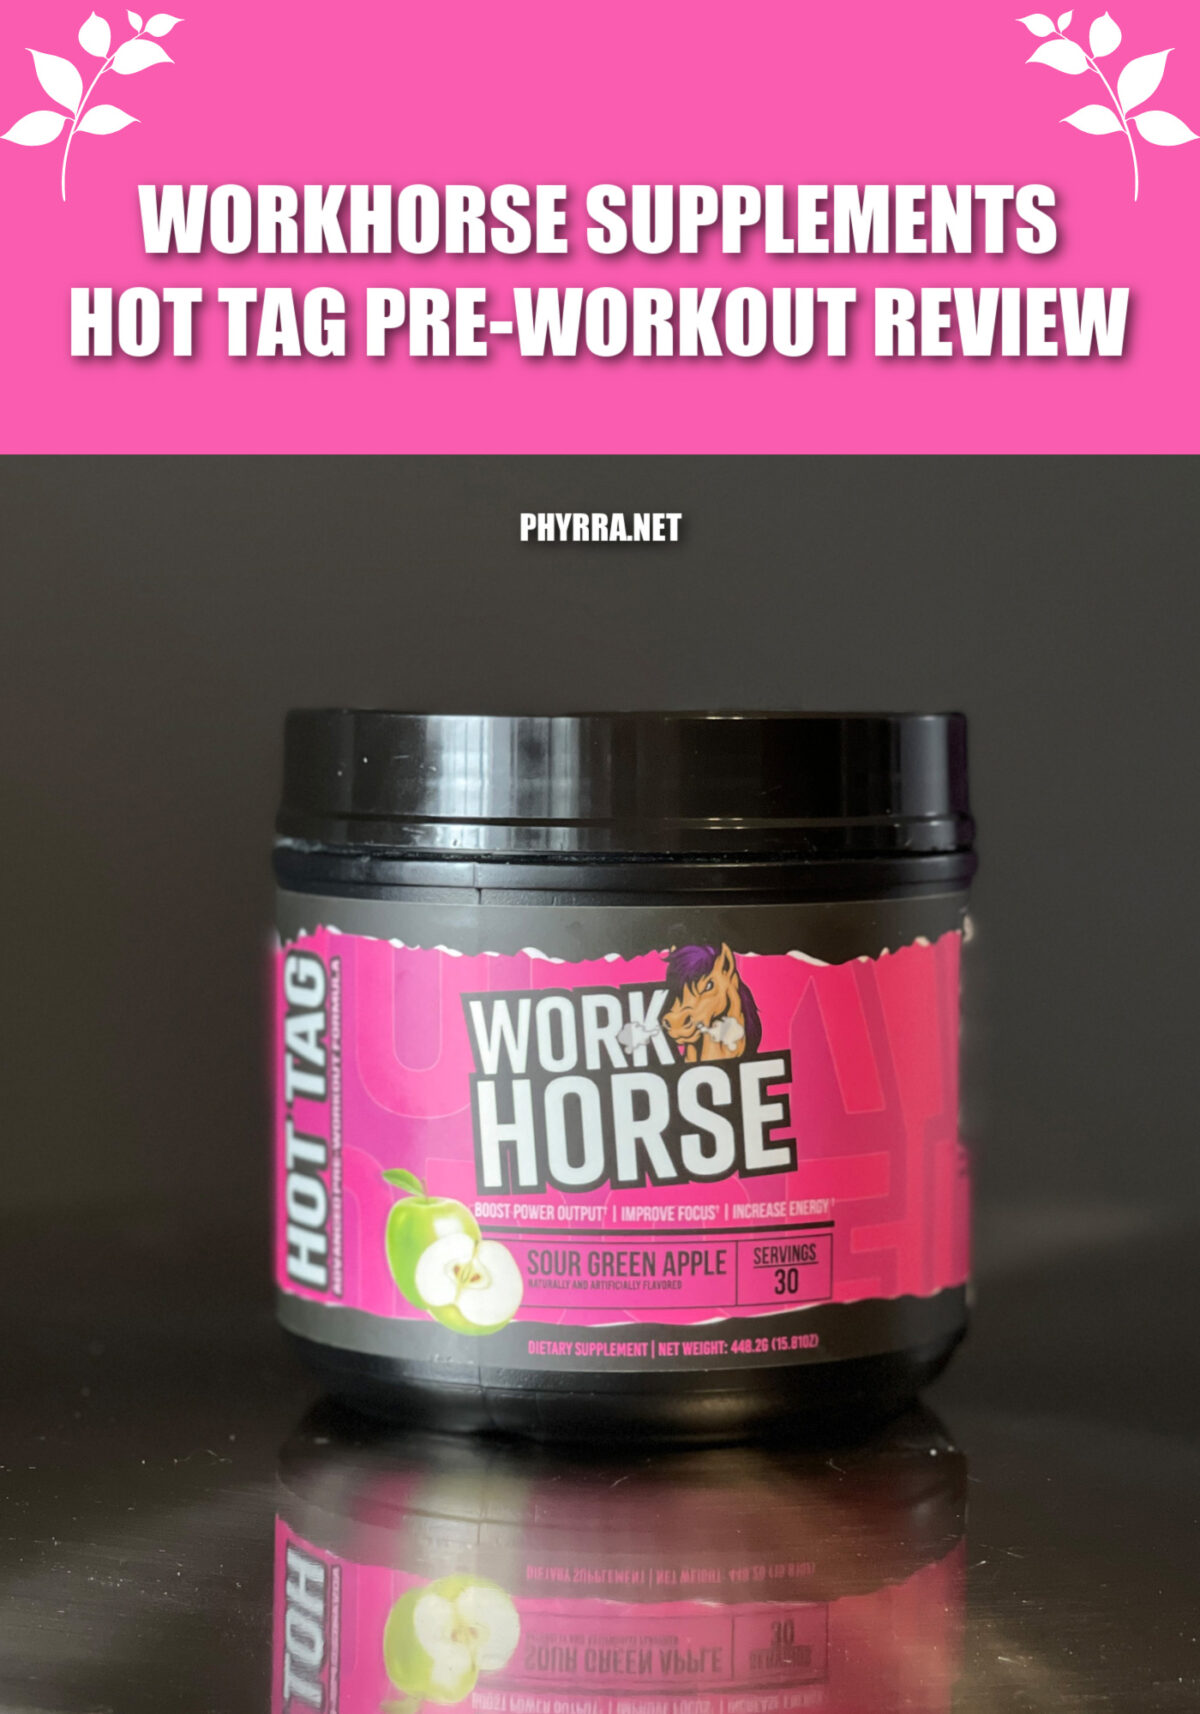 Workhorse Supplements Hot Tag Pre-Workout Review